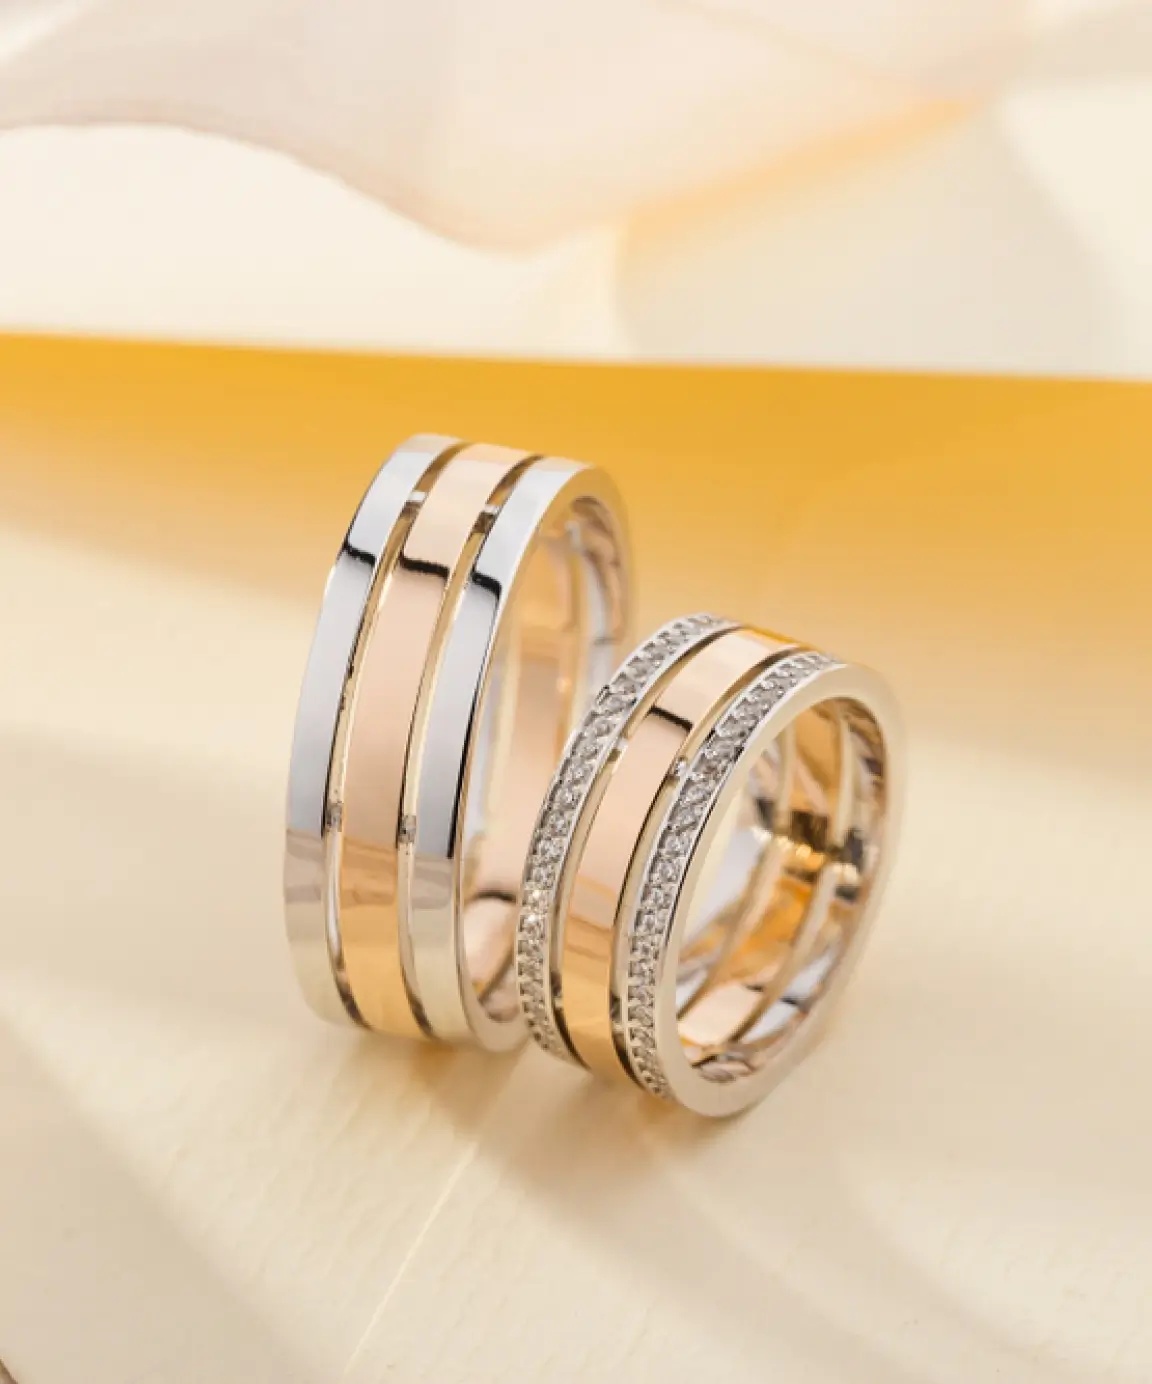 New Trend To Keep Up With: Mixed Metals Jewelry